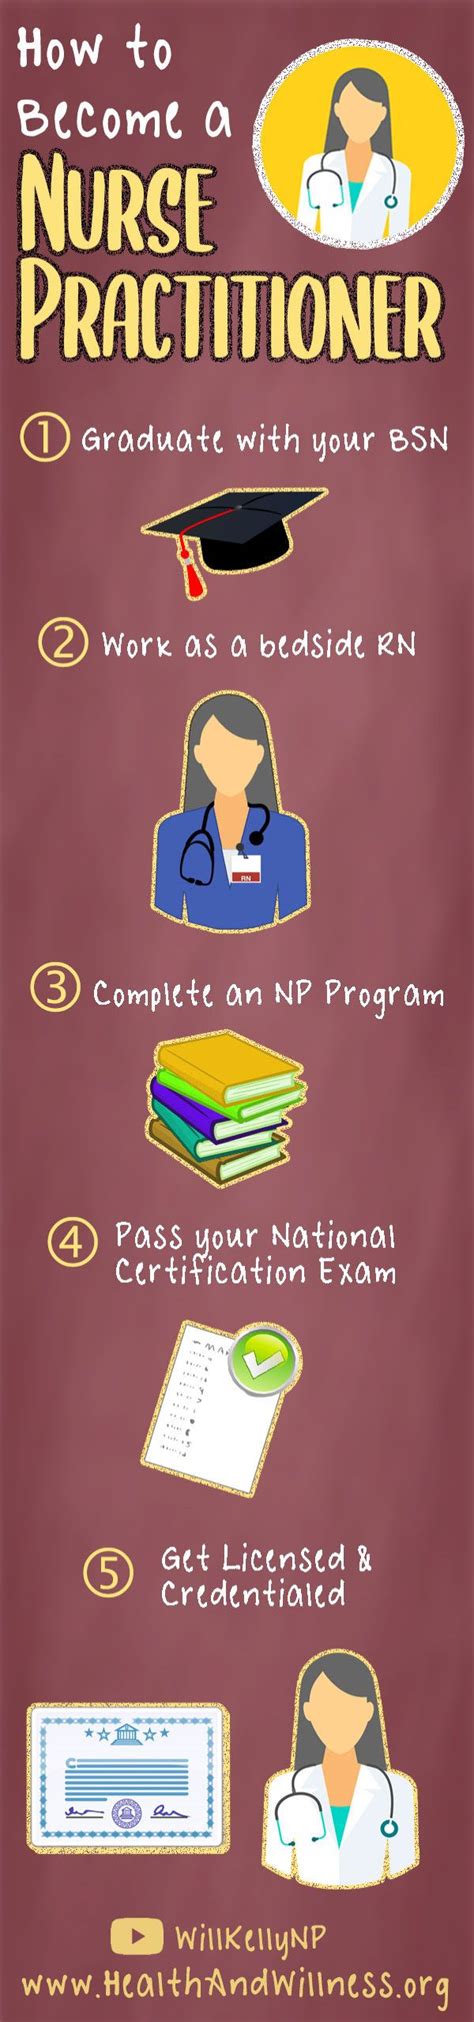 How To Become A Nurse Practitioner Health And Willness Nursing Goals